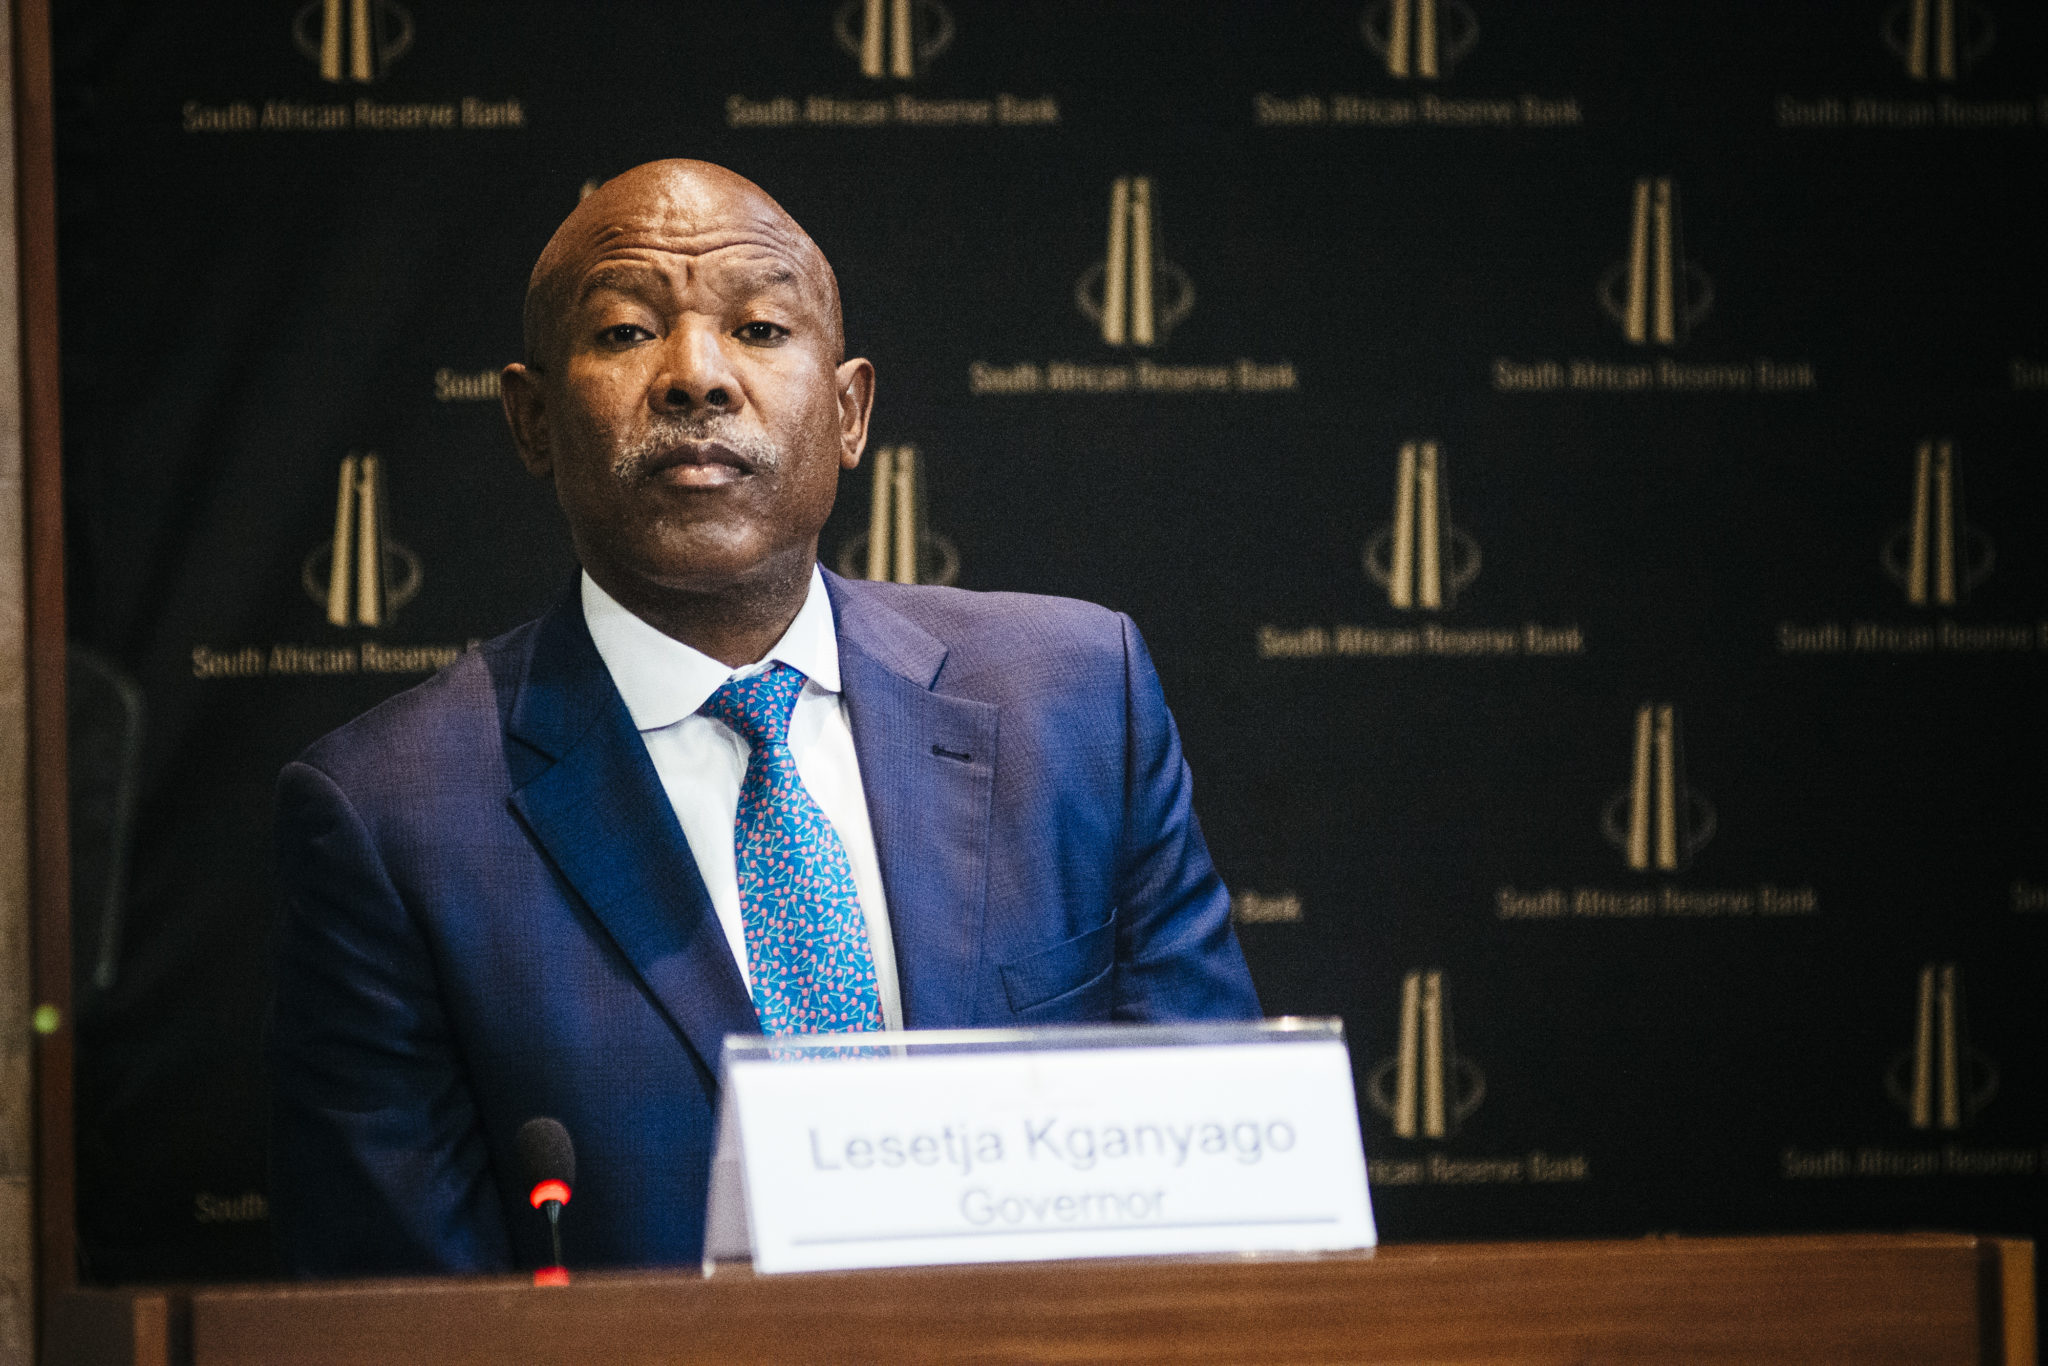 South African Reserve Bank Rate Announcement Ahead Of Stimulus Plan